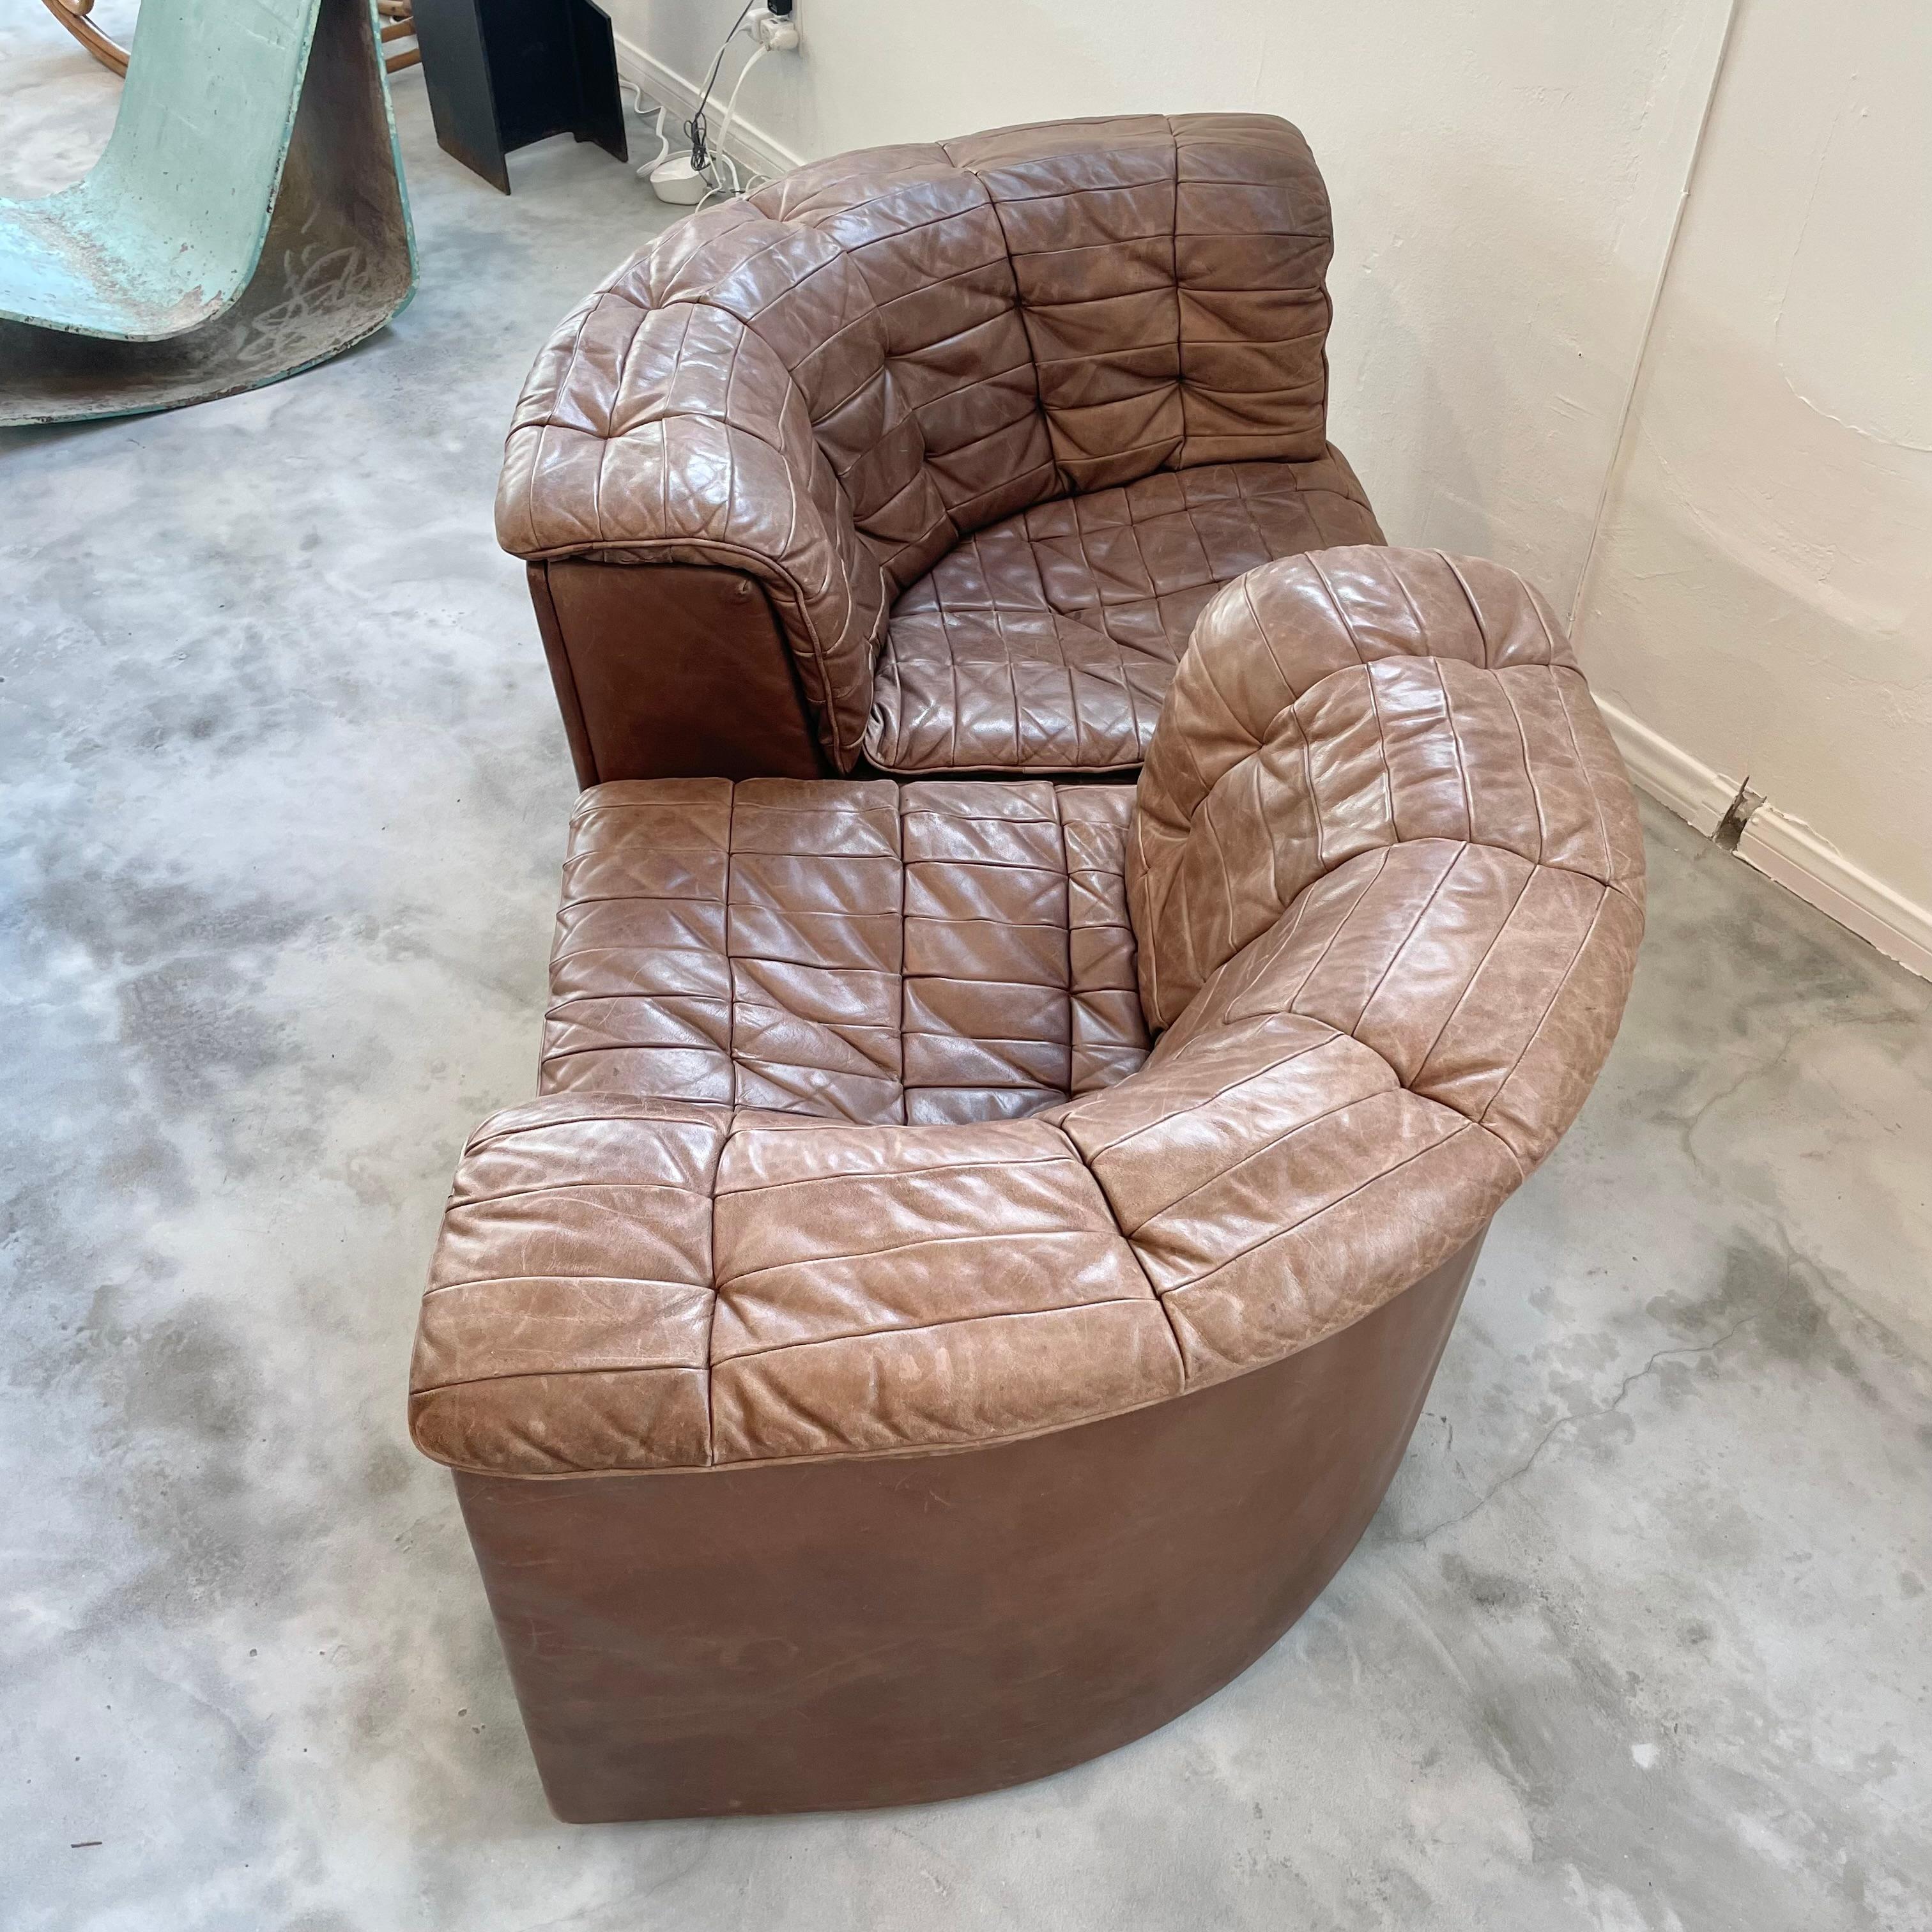 Incredible DS 11 sofa by De Sede. This set is made up of two corner pieces in a buttery soft chocolate brown leather. The two corner pieces are able to be arranged in a variety of ways which makes this piece very versatile and fun. Intricate